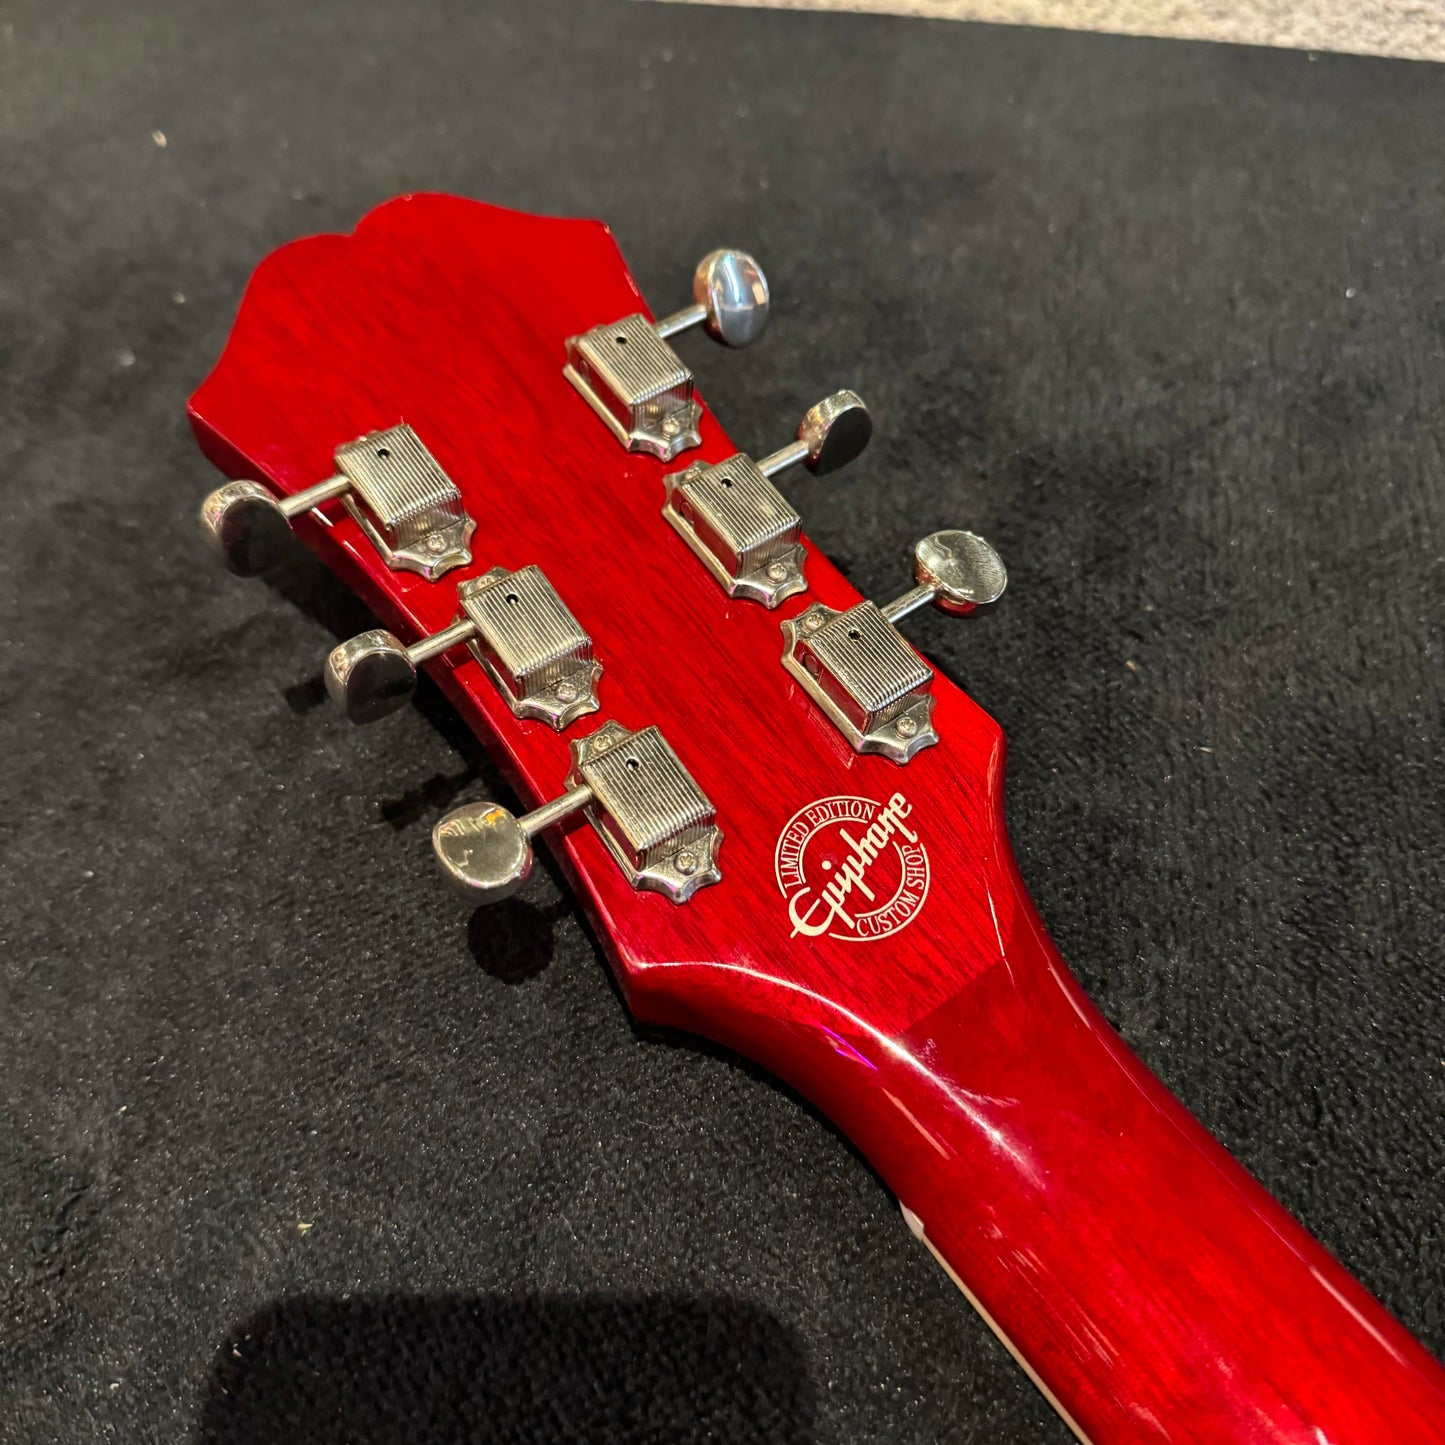 Epiphone Riviera Cherry Limited Edition